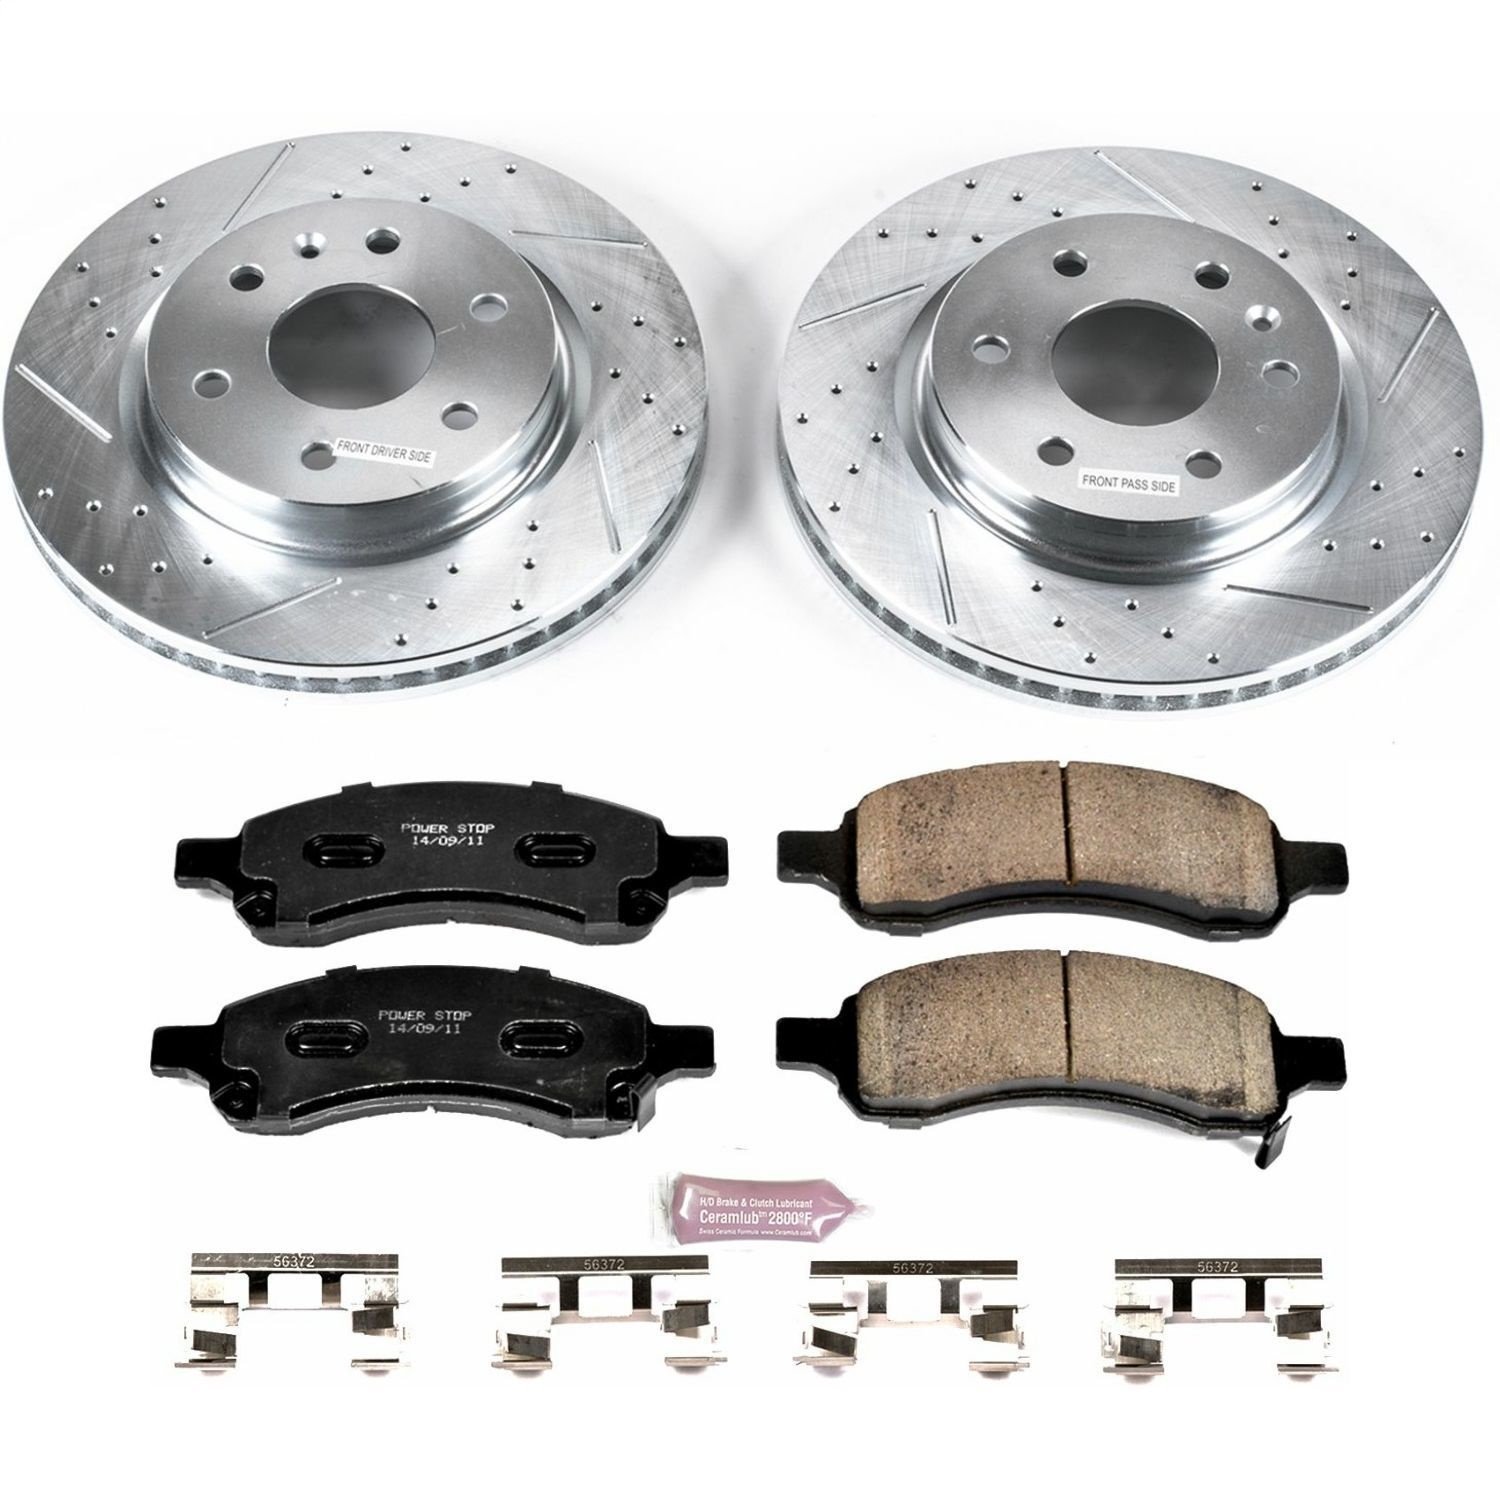 Truck and Towing Z36 Brake Pad & Rotor Kit Cross-Drilled and Slotted Rotors Z36 Carbon Ceramic Brake Pads Complete Front Kit